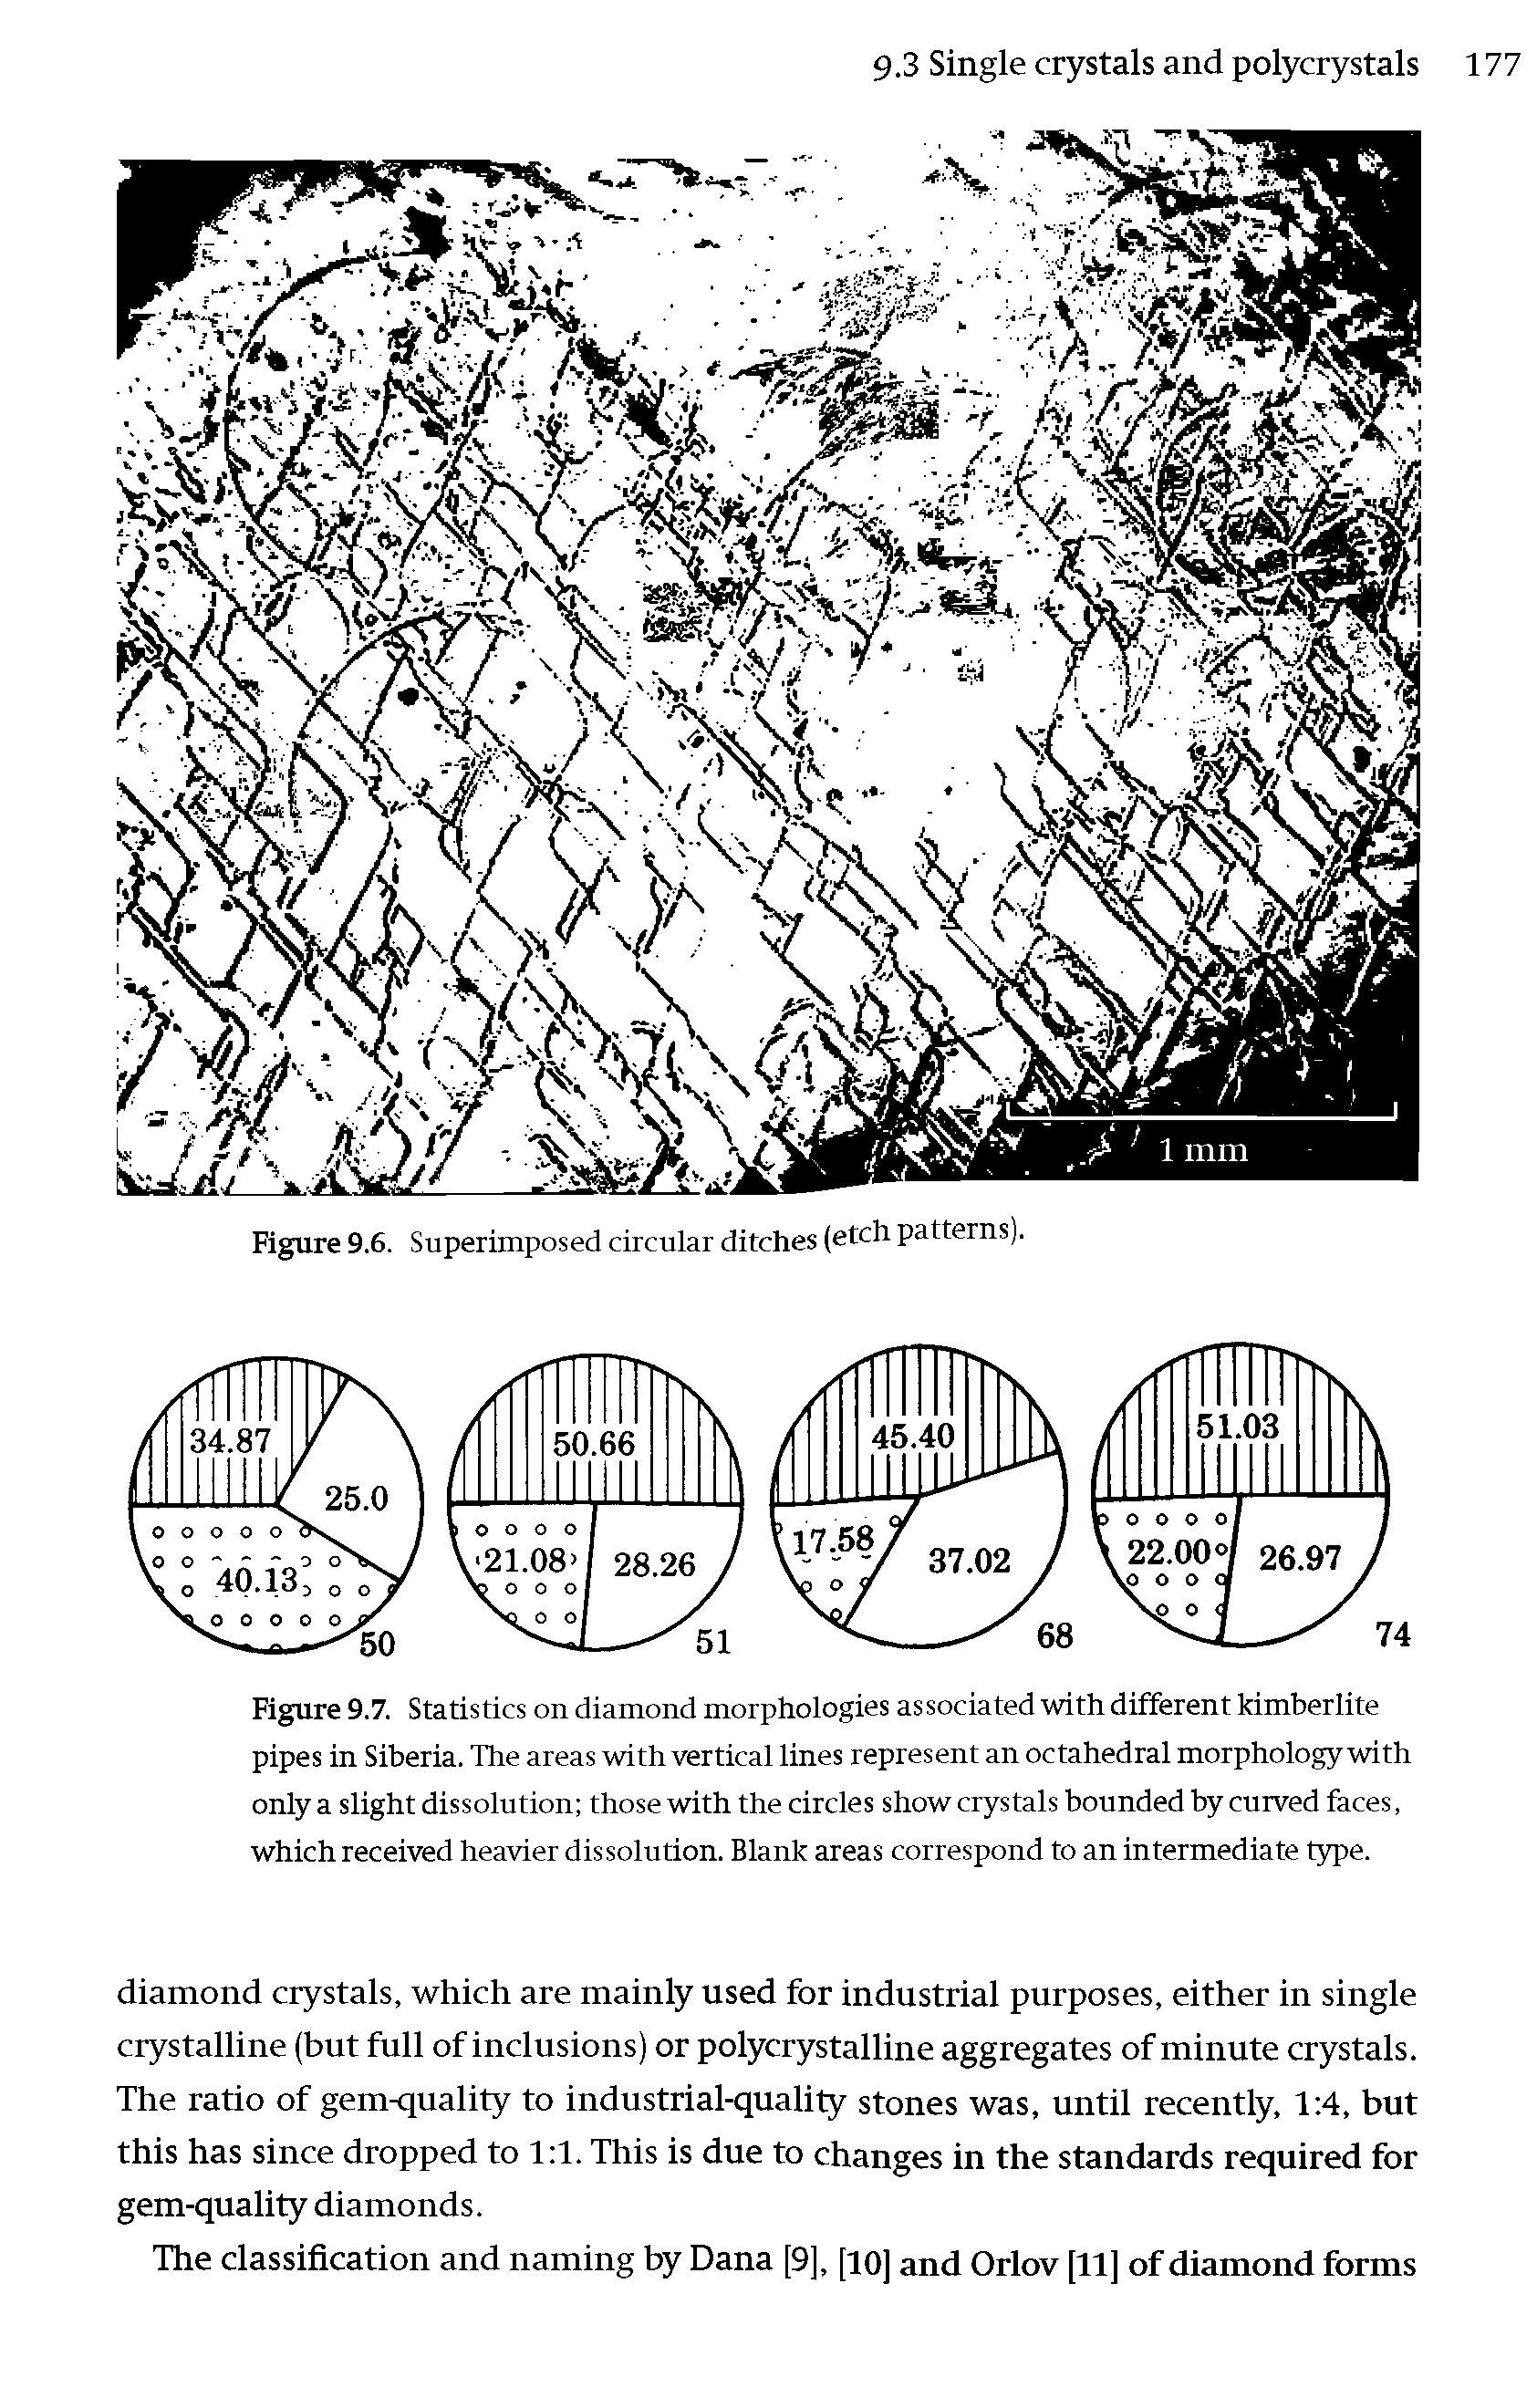 Figure 9.7. Statistics on diamond morphologies associated with different kimberlite pipes in Siberia. The areas with vertical lines represent an octahedral morphology with only a slight dissolution those with the circles show crystals bounded by curved faces, which received heavier dissolution. Blank areas correspond to an intermediate type.